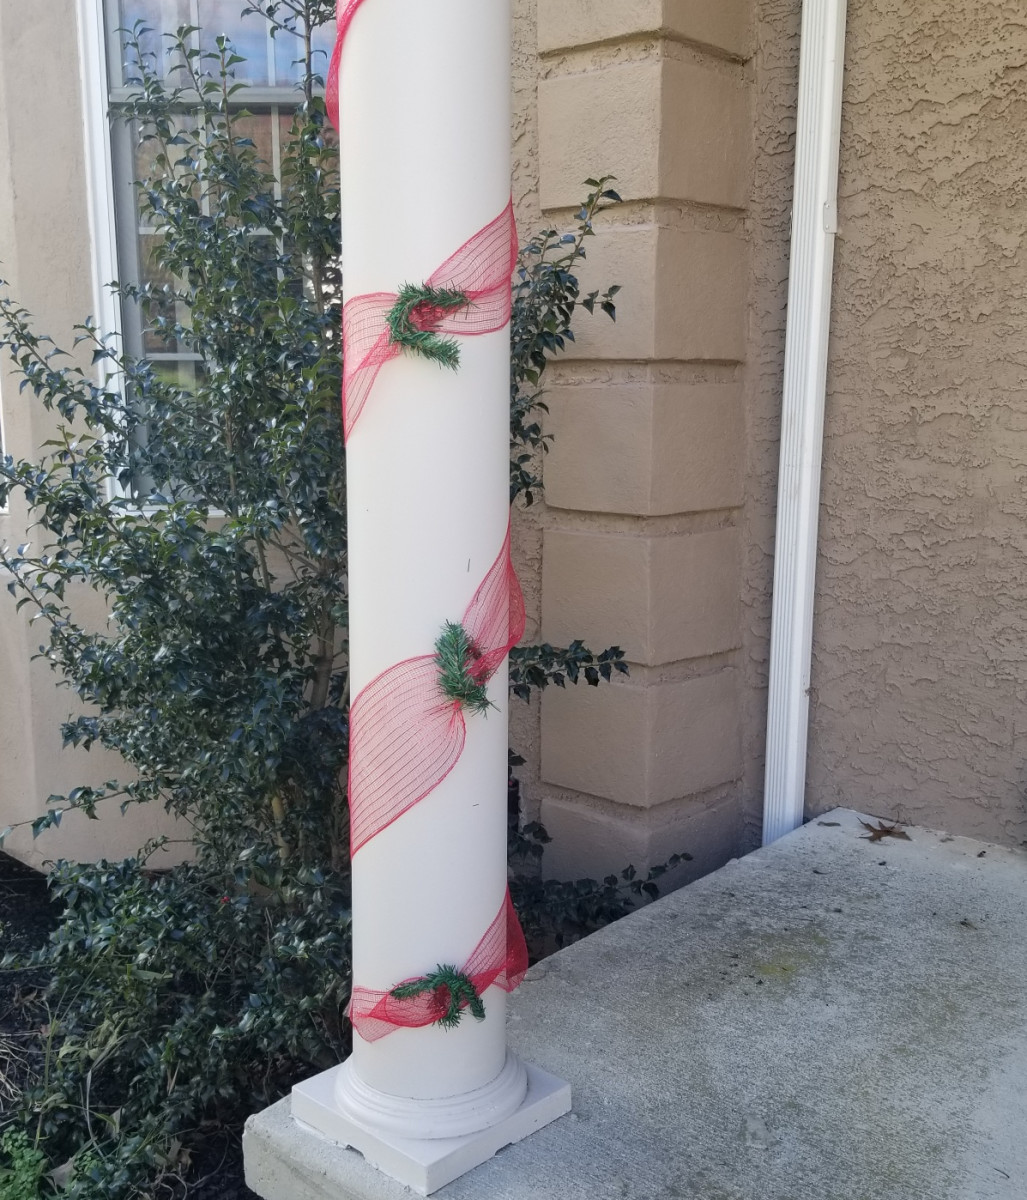 A little ribbon and greenery can make excellent Christmas decorations for exterior columns outside your home.